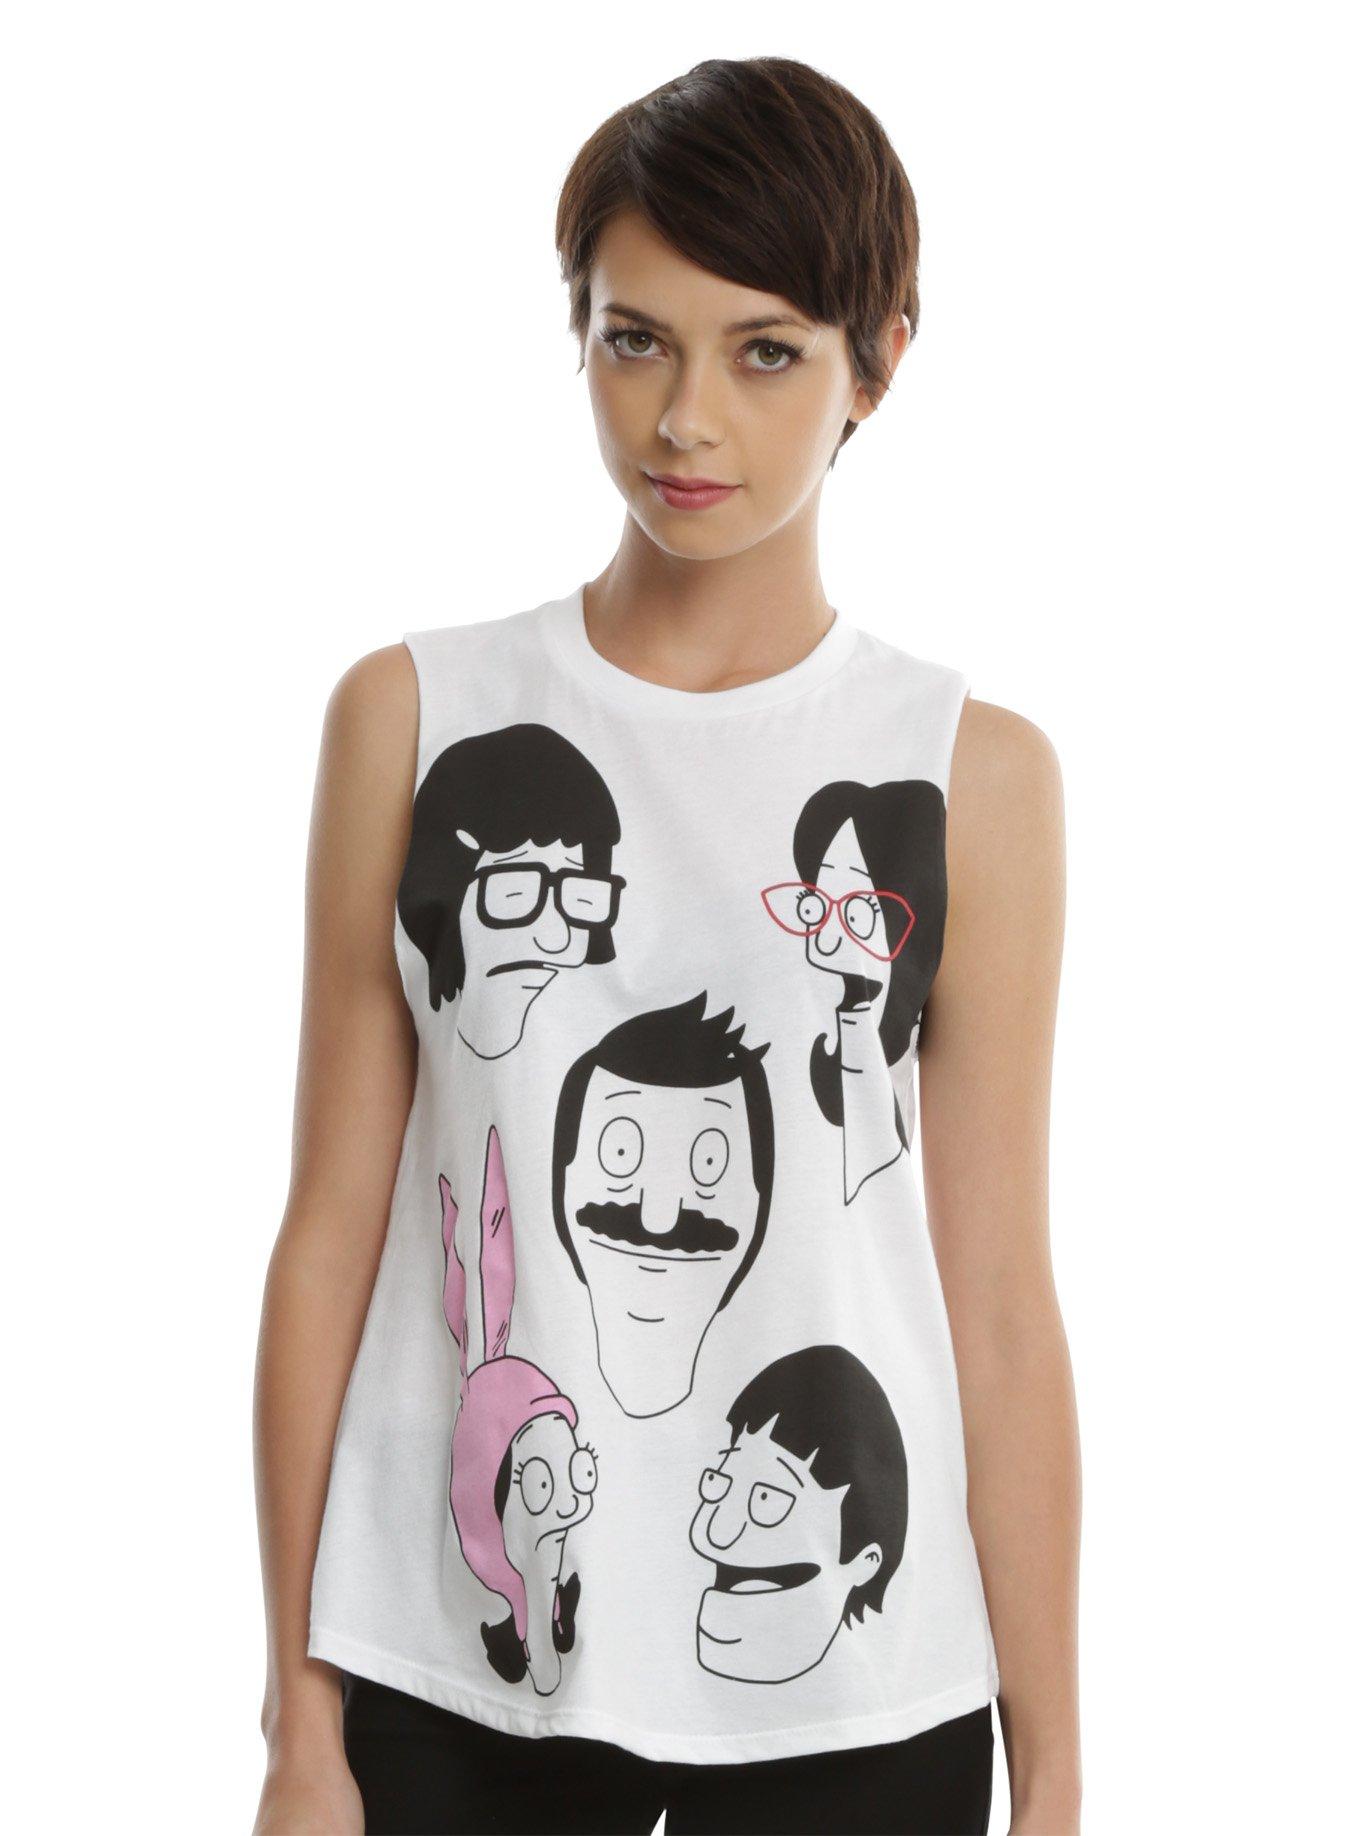 Bob's Burgers Faces Girls Muscle Top, WHITE, hi-res